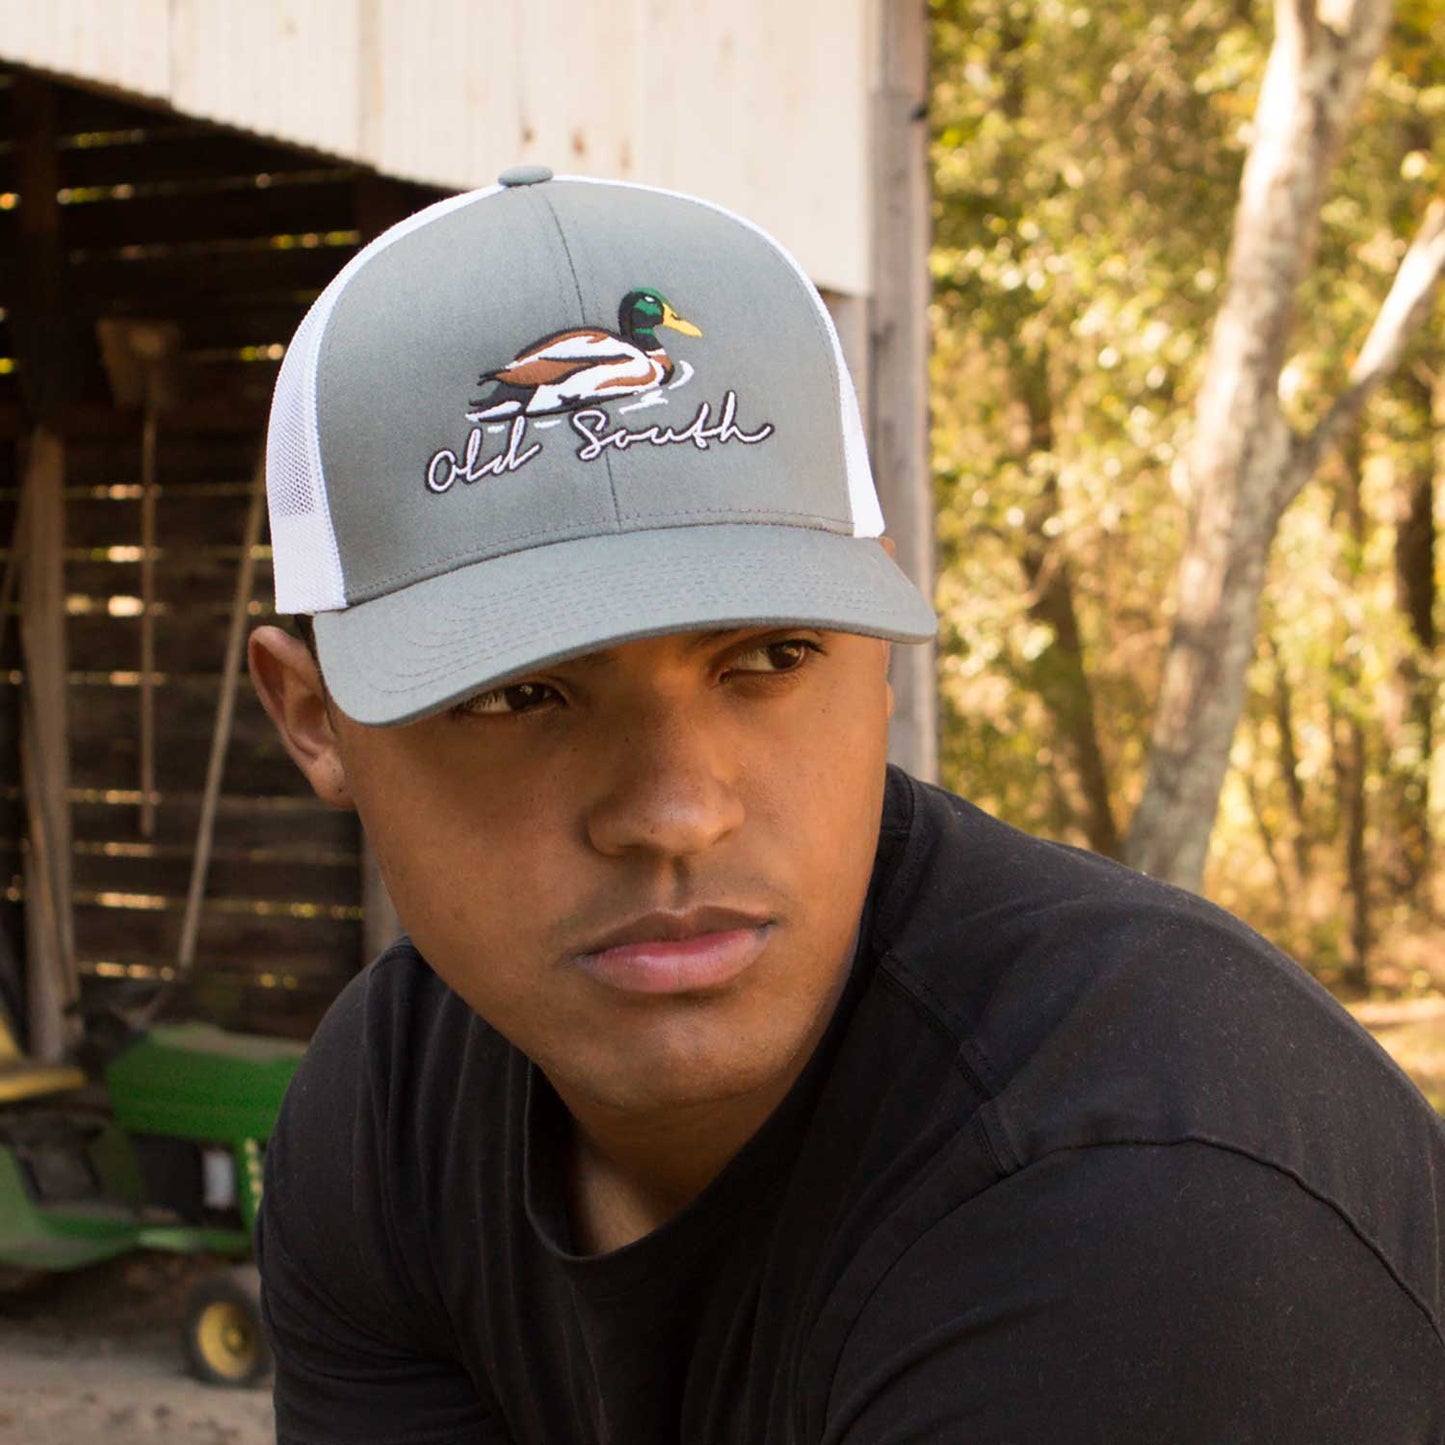 OldSouthApparel_Migrated - Trucker Hat